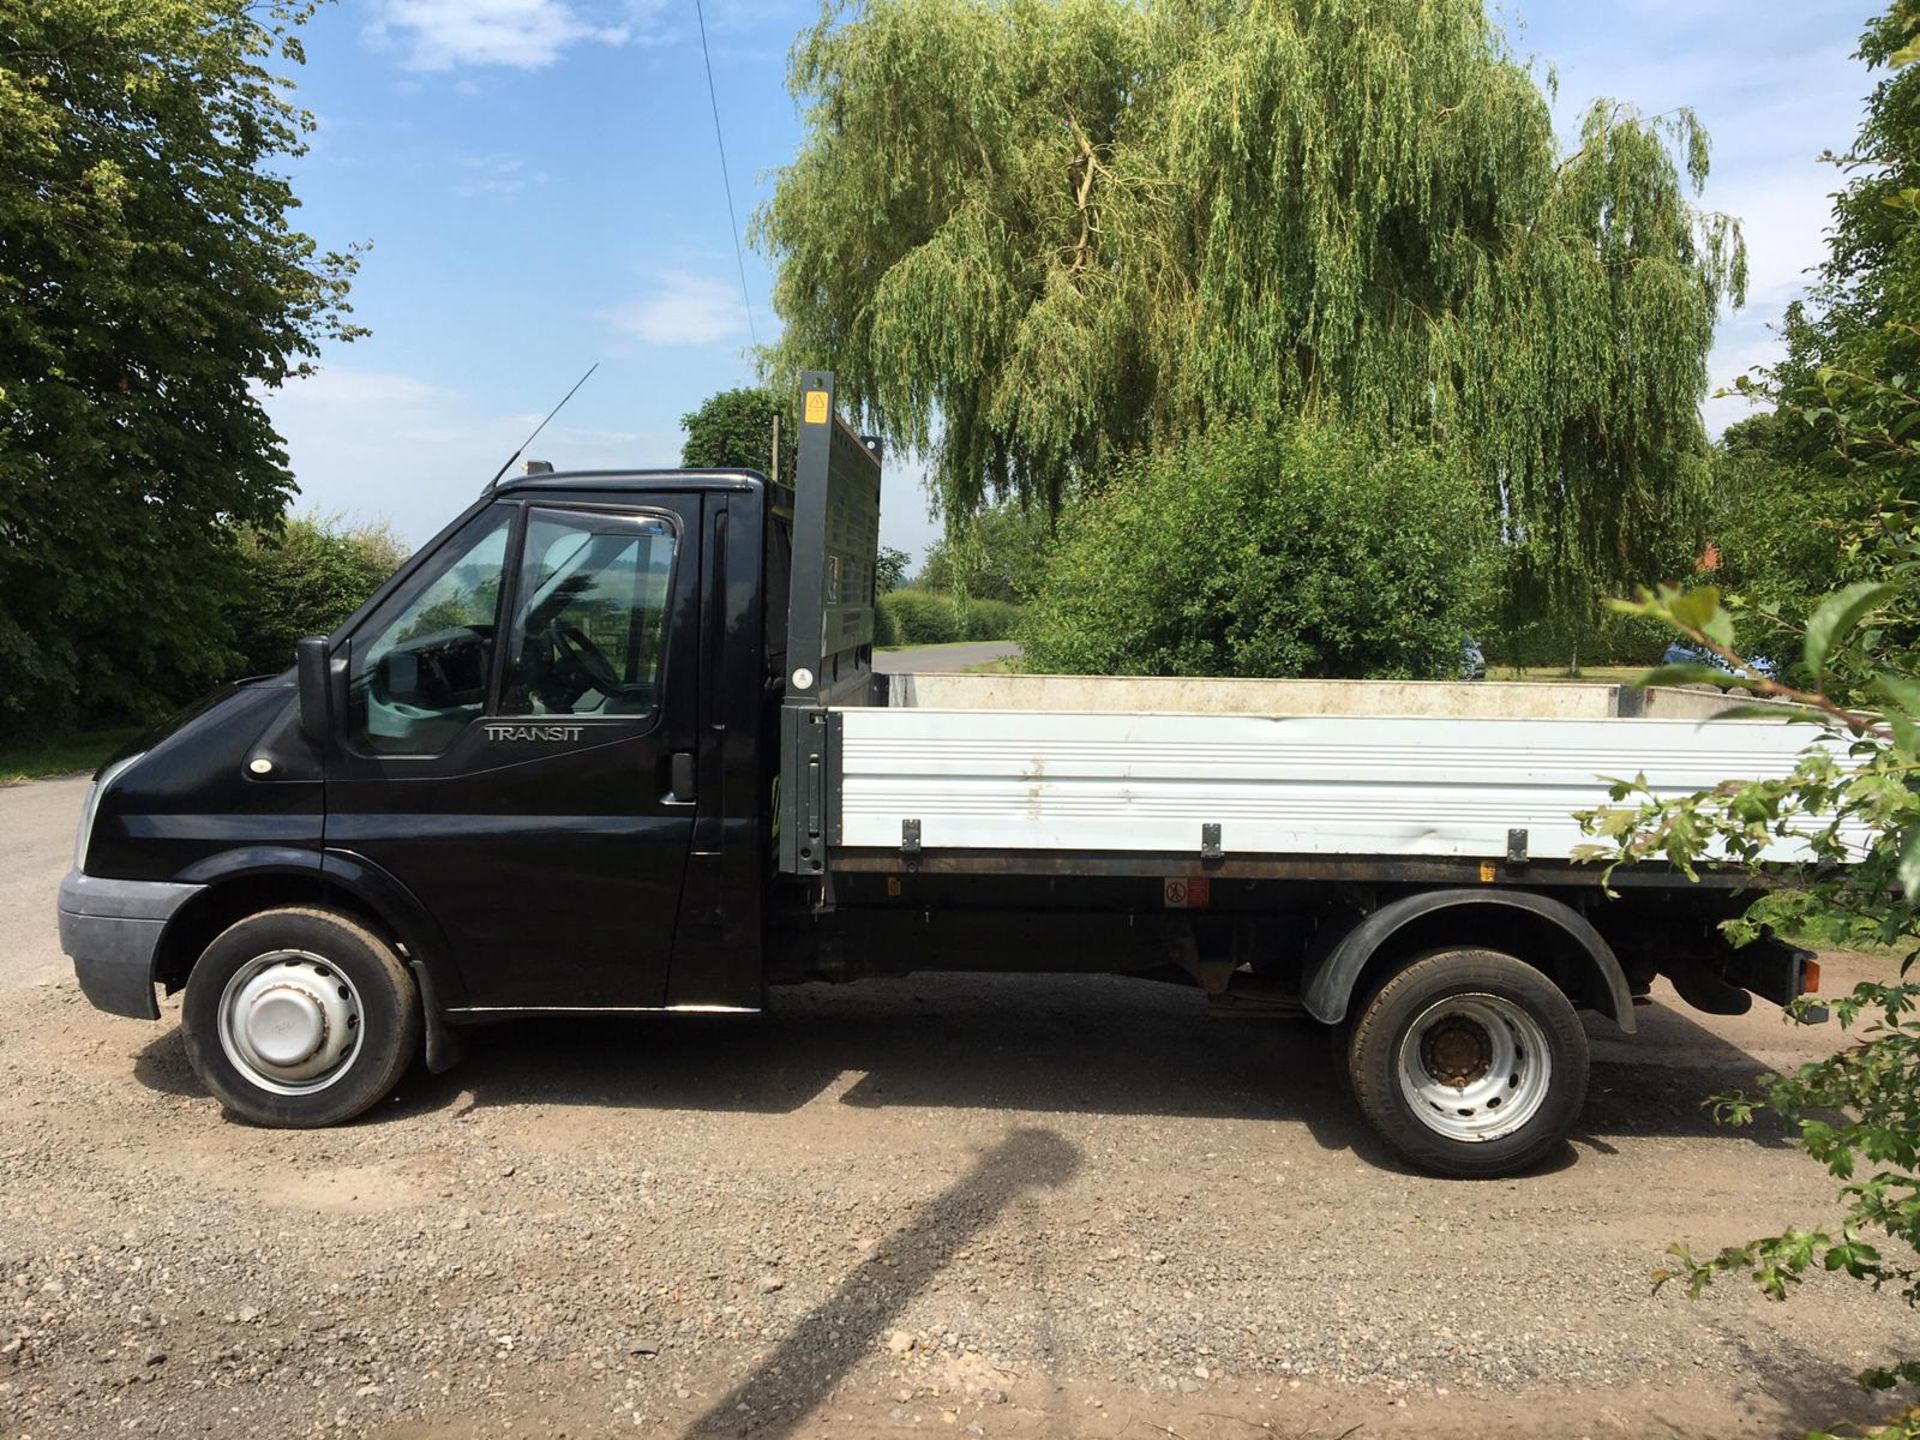 2013/63 REG FORD TRANSIT 100 T350 RWD 2.2 DIESEL DROPSIDE LORRY TIPPER, SHOWING 0 FORMER KEEPERS - Image 4 of 10